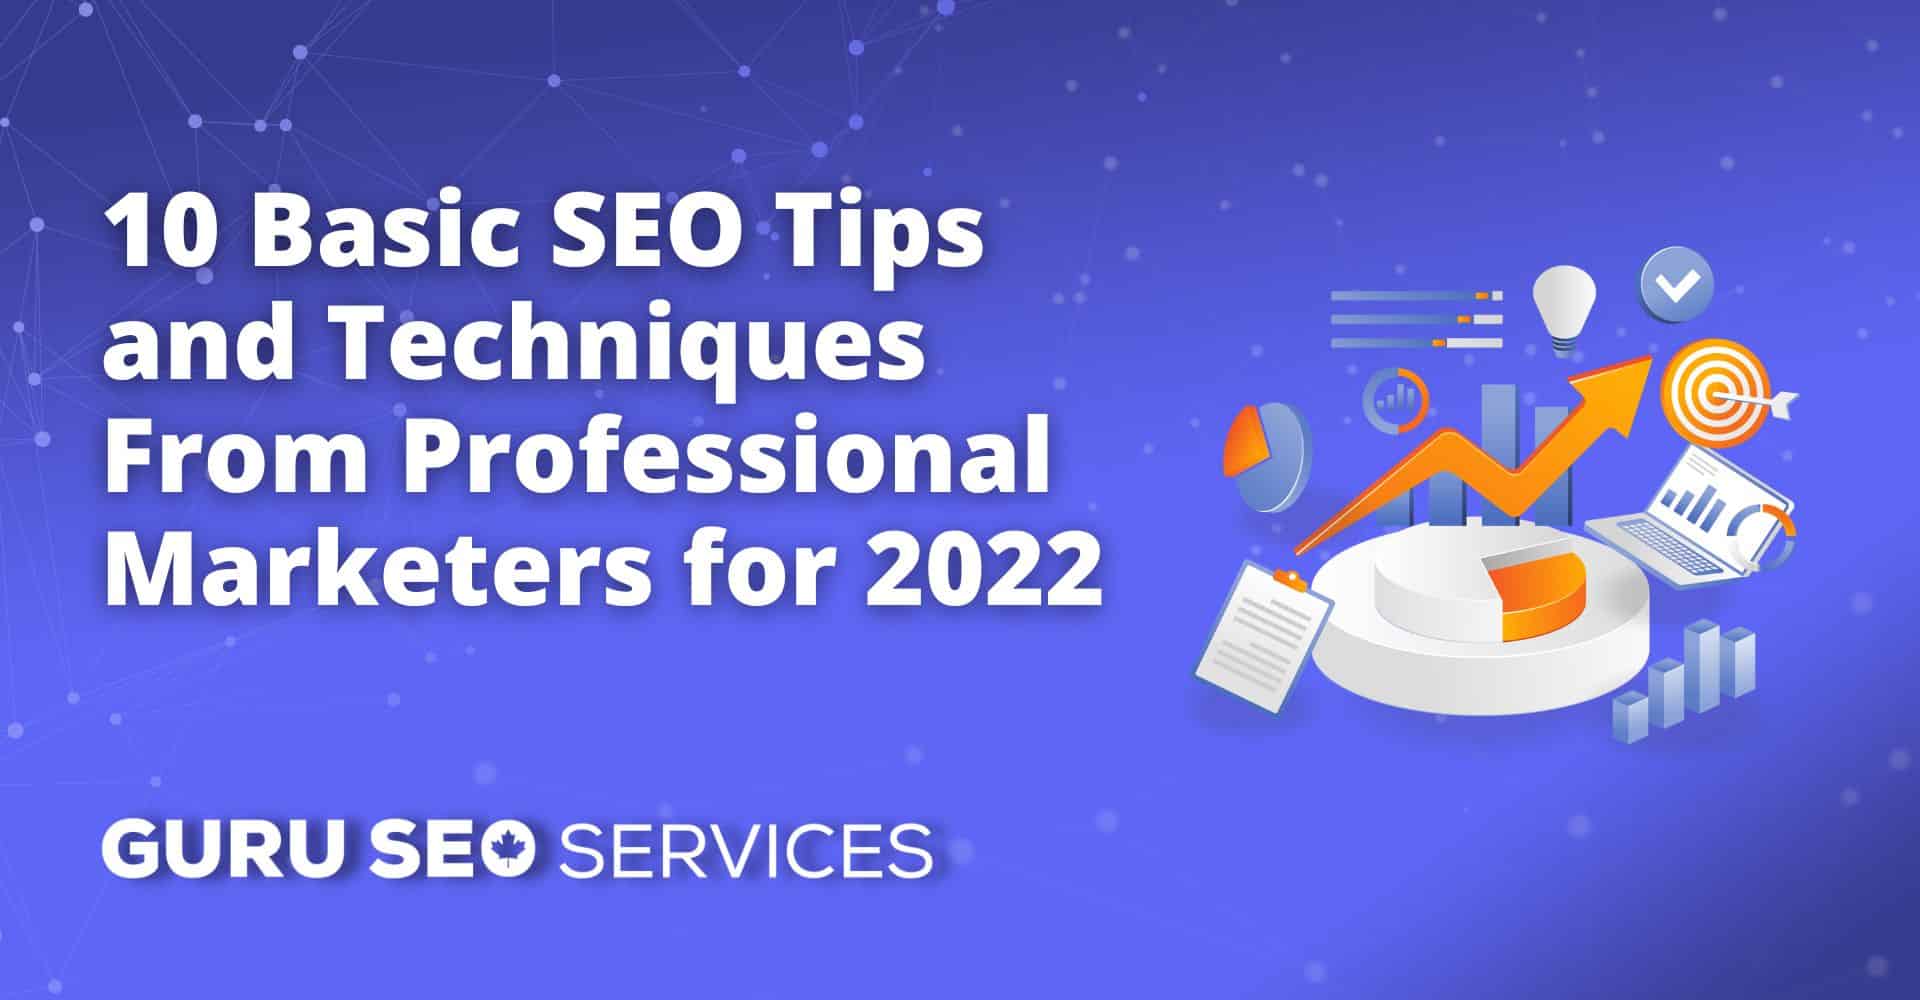 Discover 10 essential SEO tips and techniques from professional marketers to elevate your web design strategy for 2020.